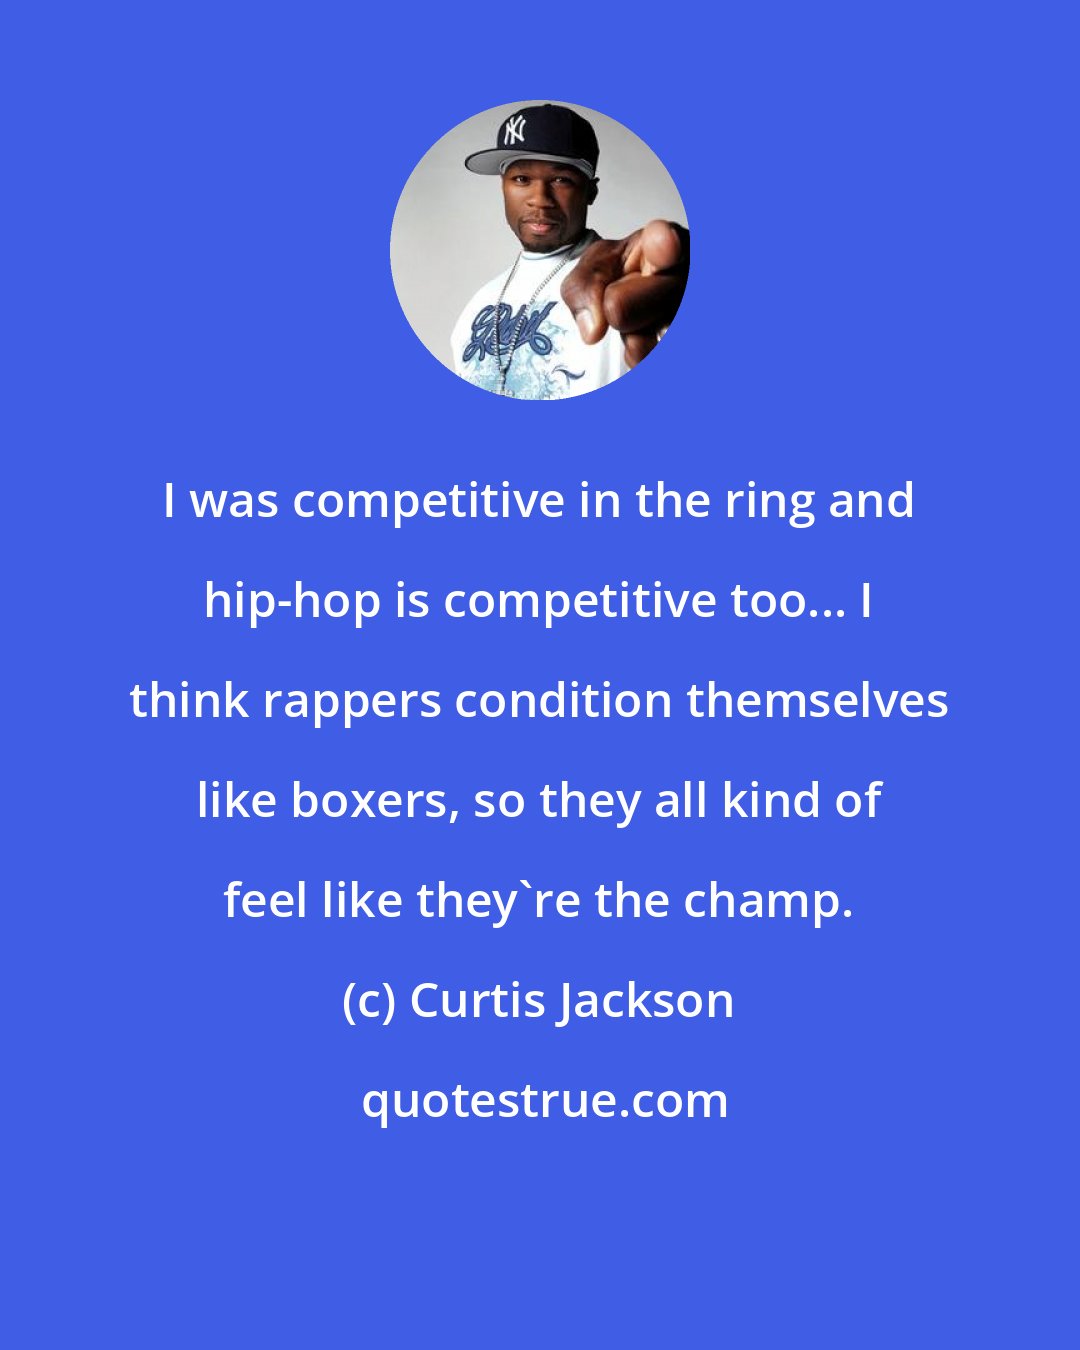 Curtis Jackson: I was competitive in the ring and hip-hop is competitive too... I think rappers condition themselves like boxers, so they all kind of feel like they're the champ.